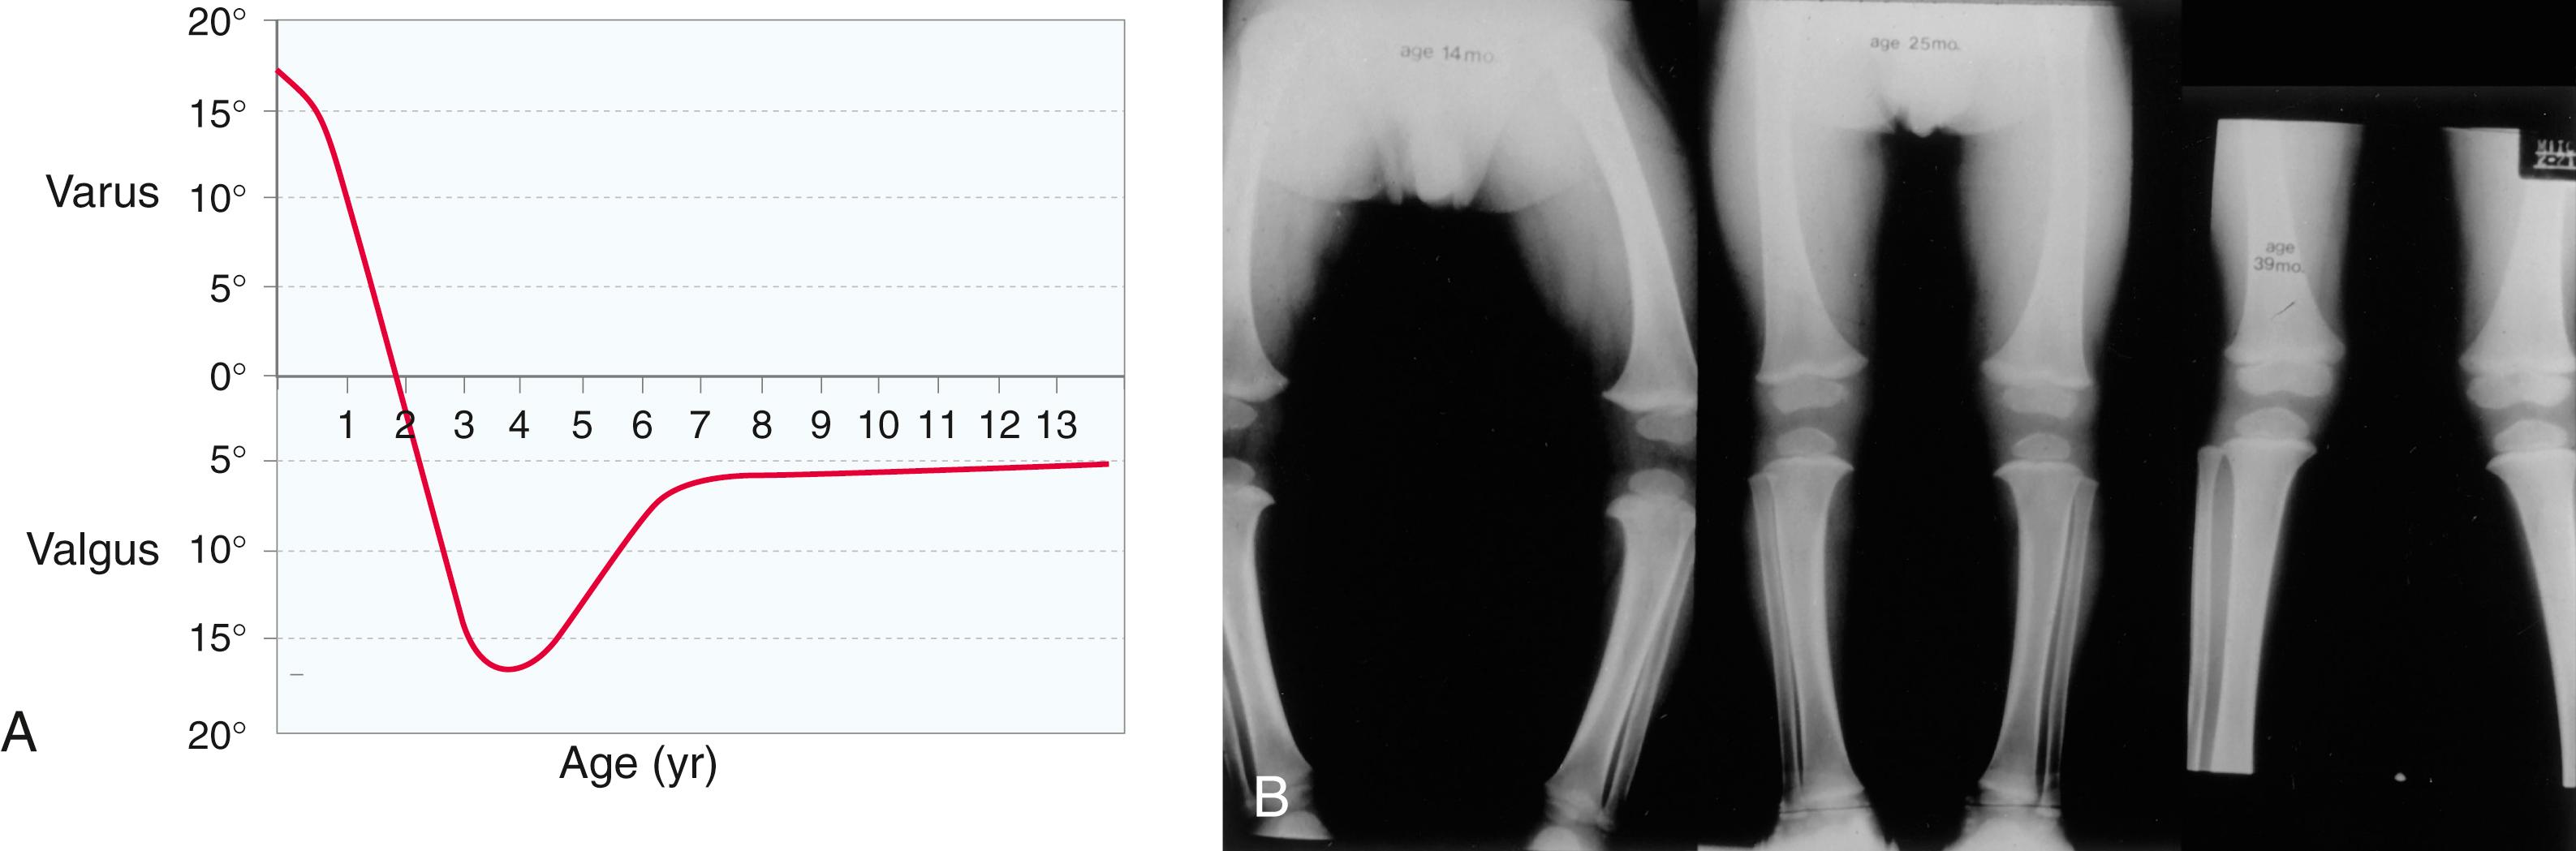 FIG. 18.13, (A) Development of the tibiofemoral angle during growth (after Salenius). (B) Serial radiographs demonstrating normal transition from varus alignment at 14 months to neutral position at 25 months to valgus tibiofemoral alignment at 39 months.